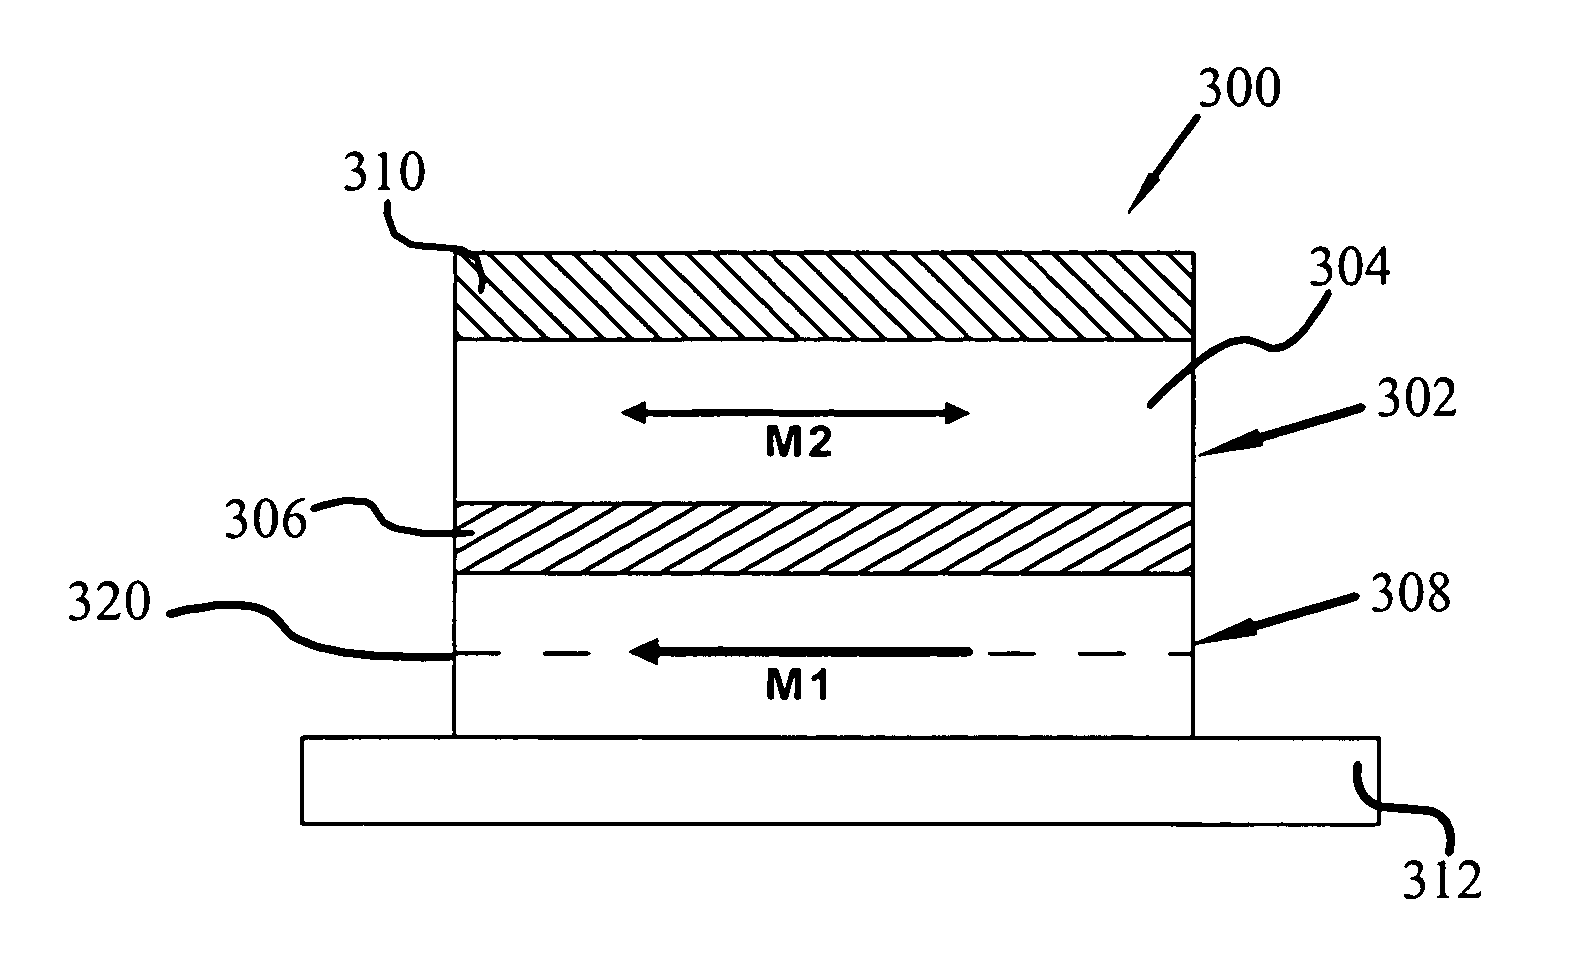 Multilayer pinned reference layer for a magnetic storage device